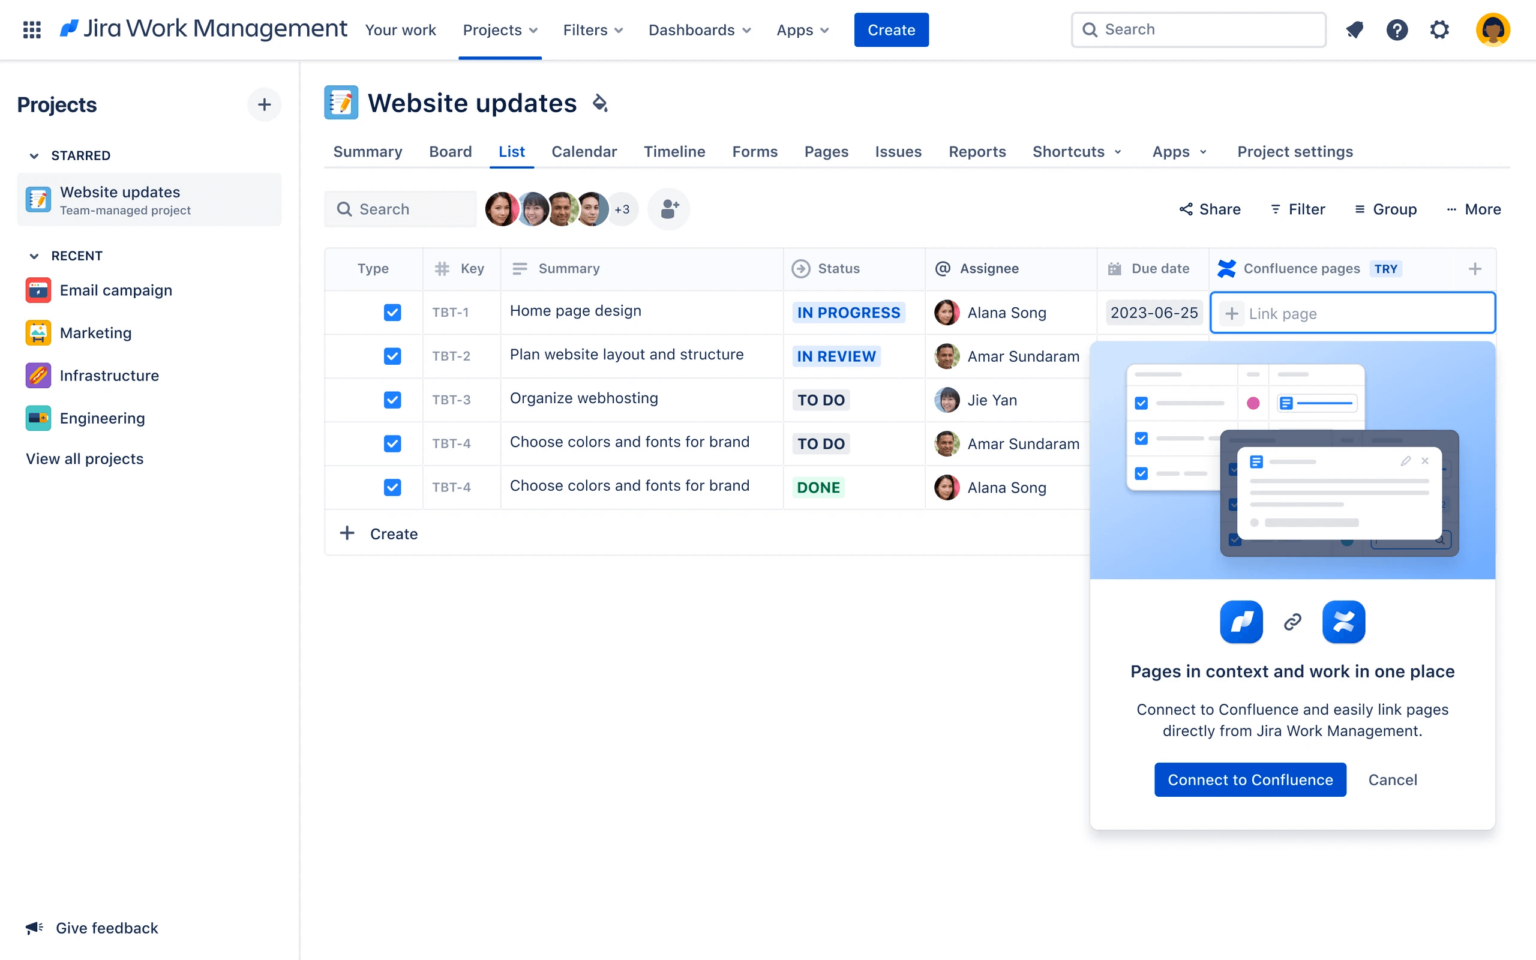 Jira Work Management - Bridging the Gap between Technical and Business Team - searching for Confluence pages directly in the list tab in Jira Work Management